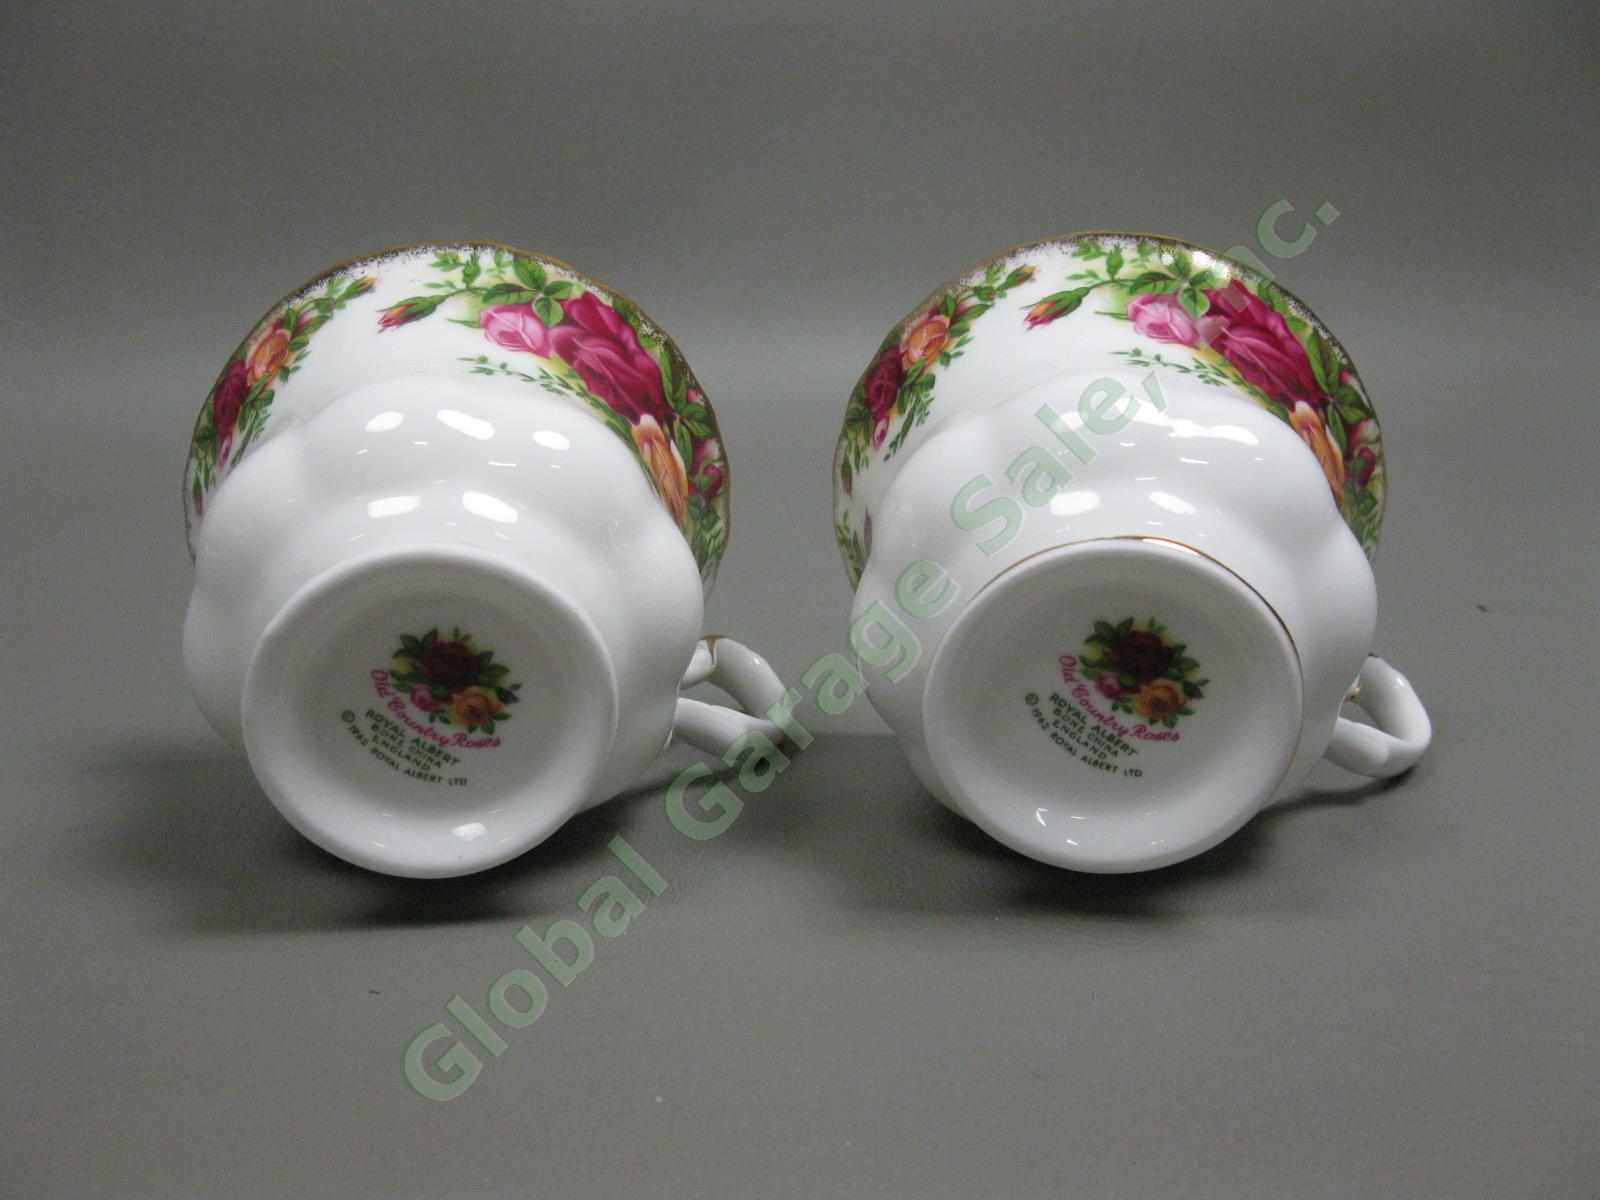 8 Royal Albert Old Country Roses Footed Tea Cup/Saucer Gold Trim Bone China Set 16